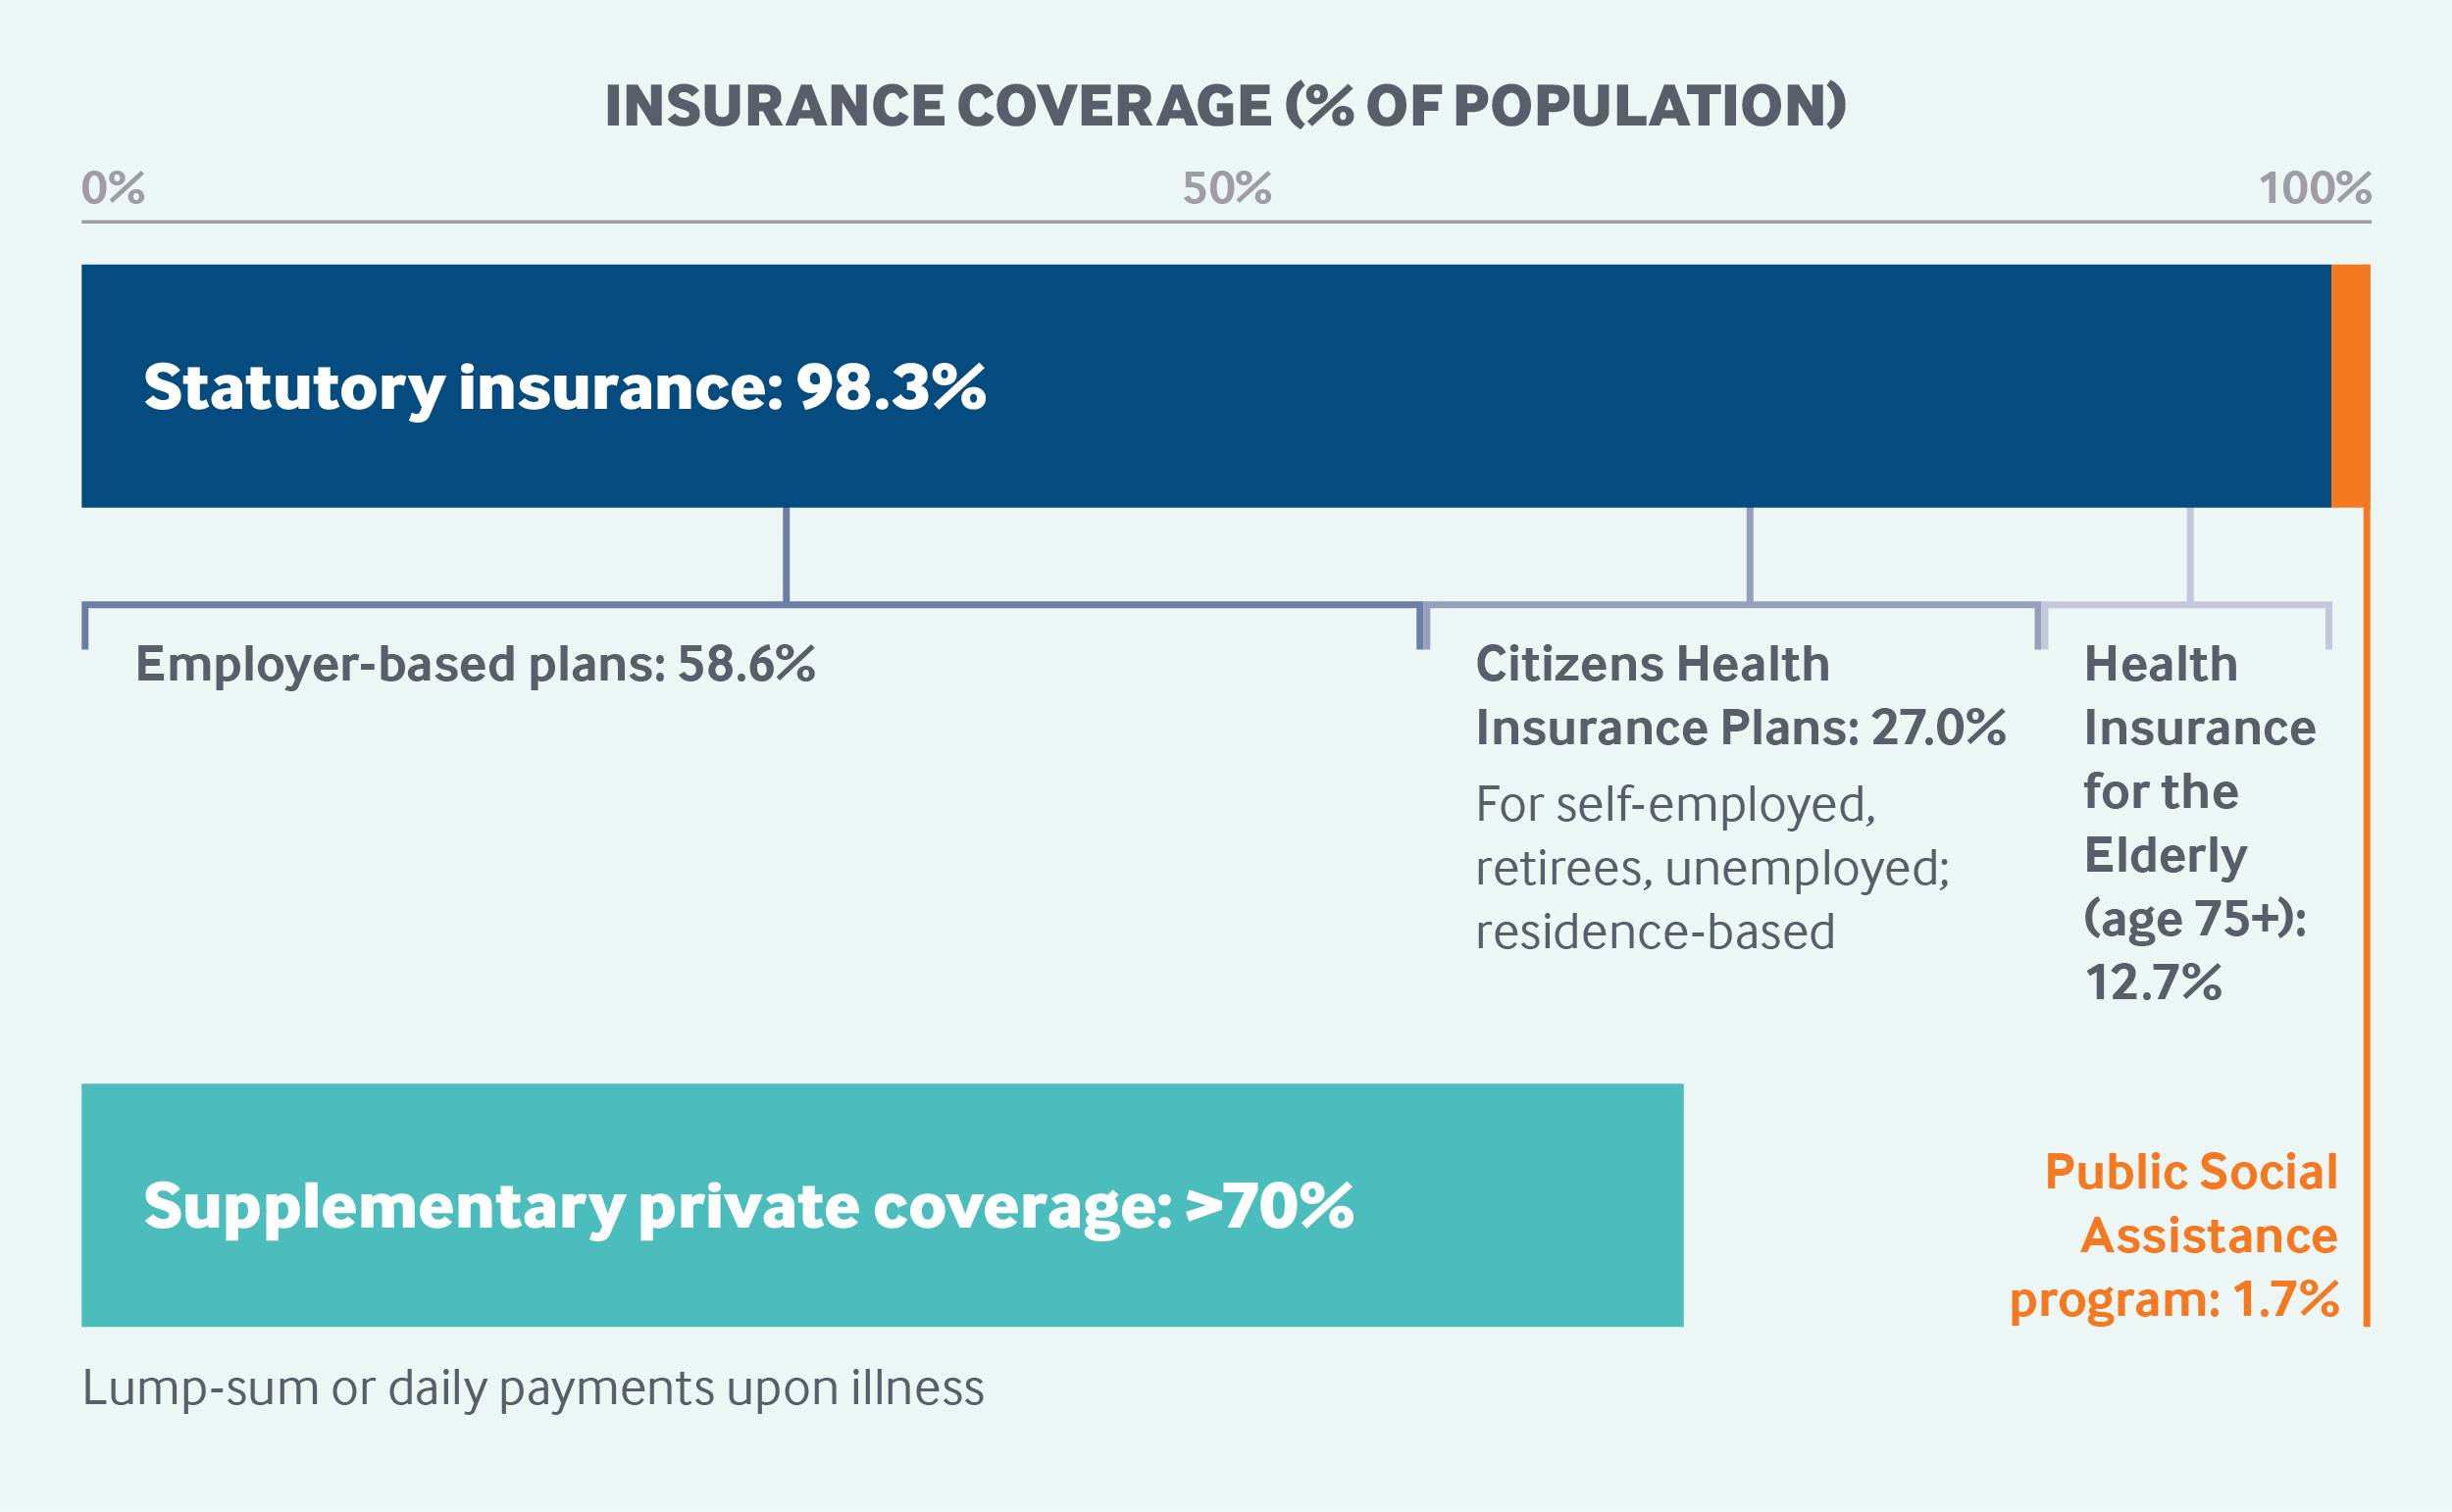 Insurance Coverage in Japan